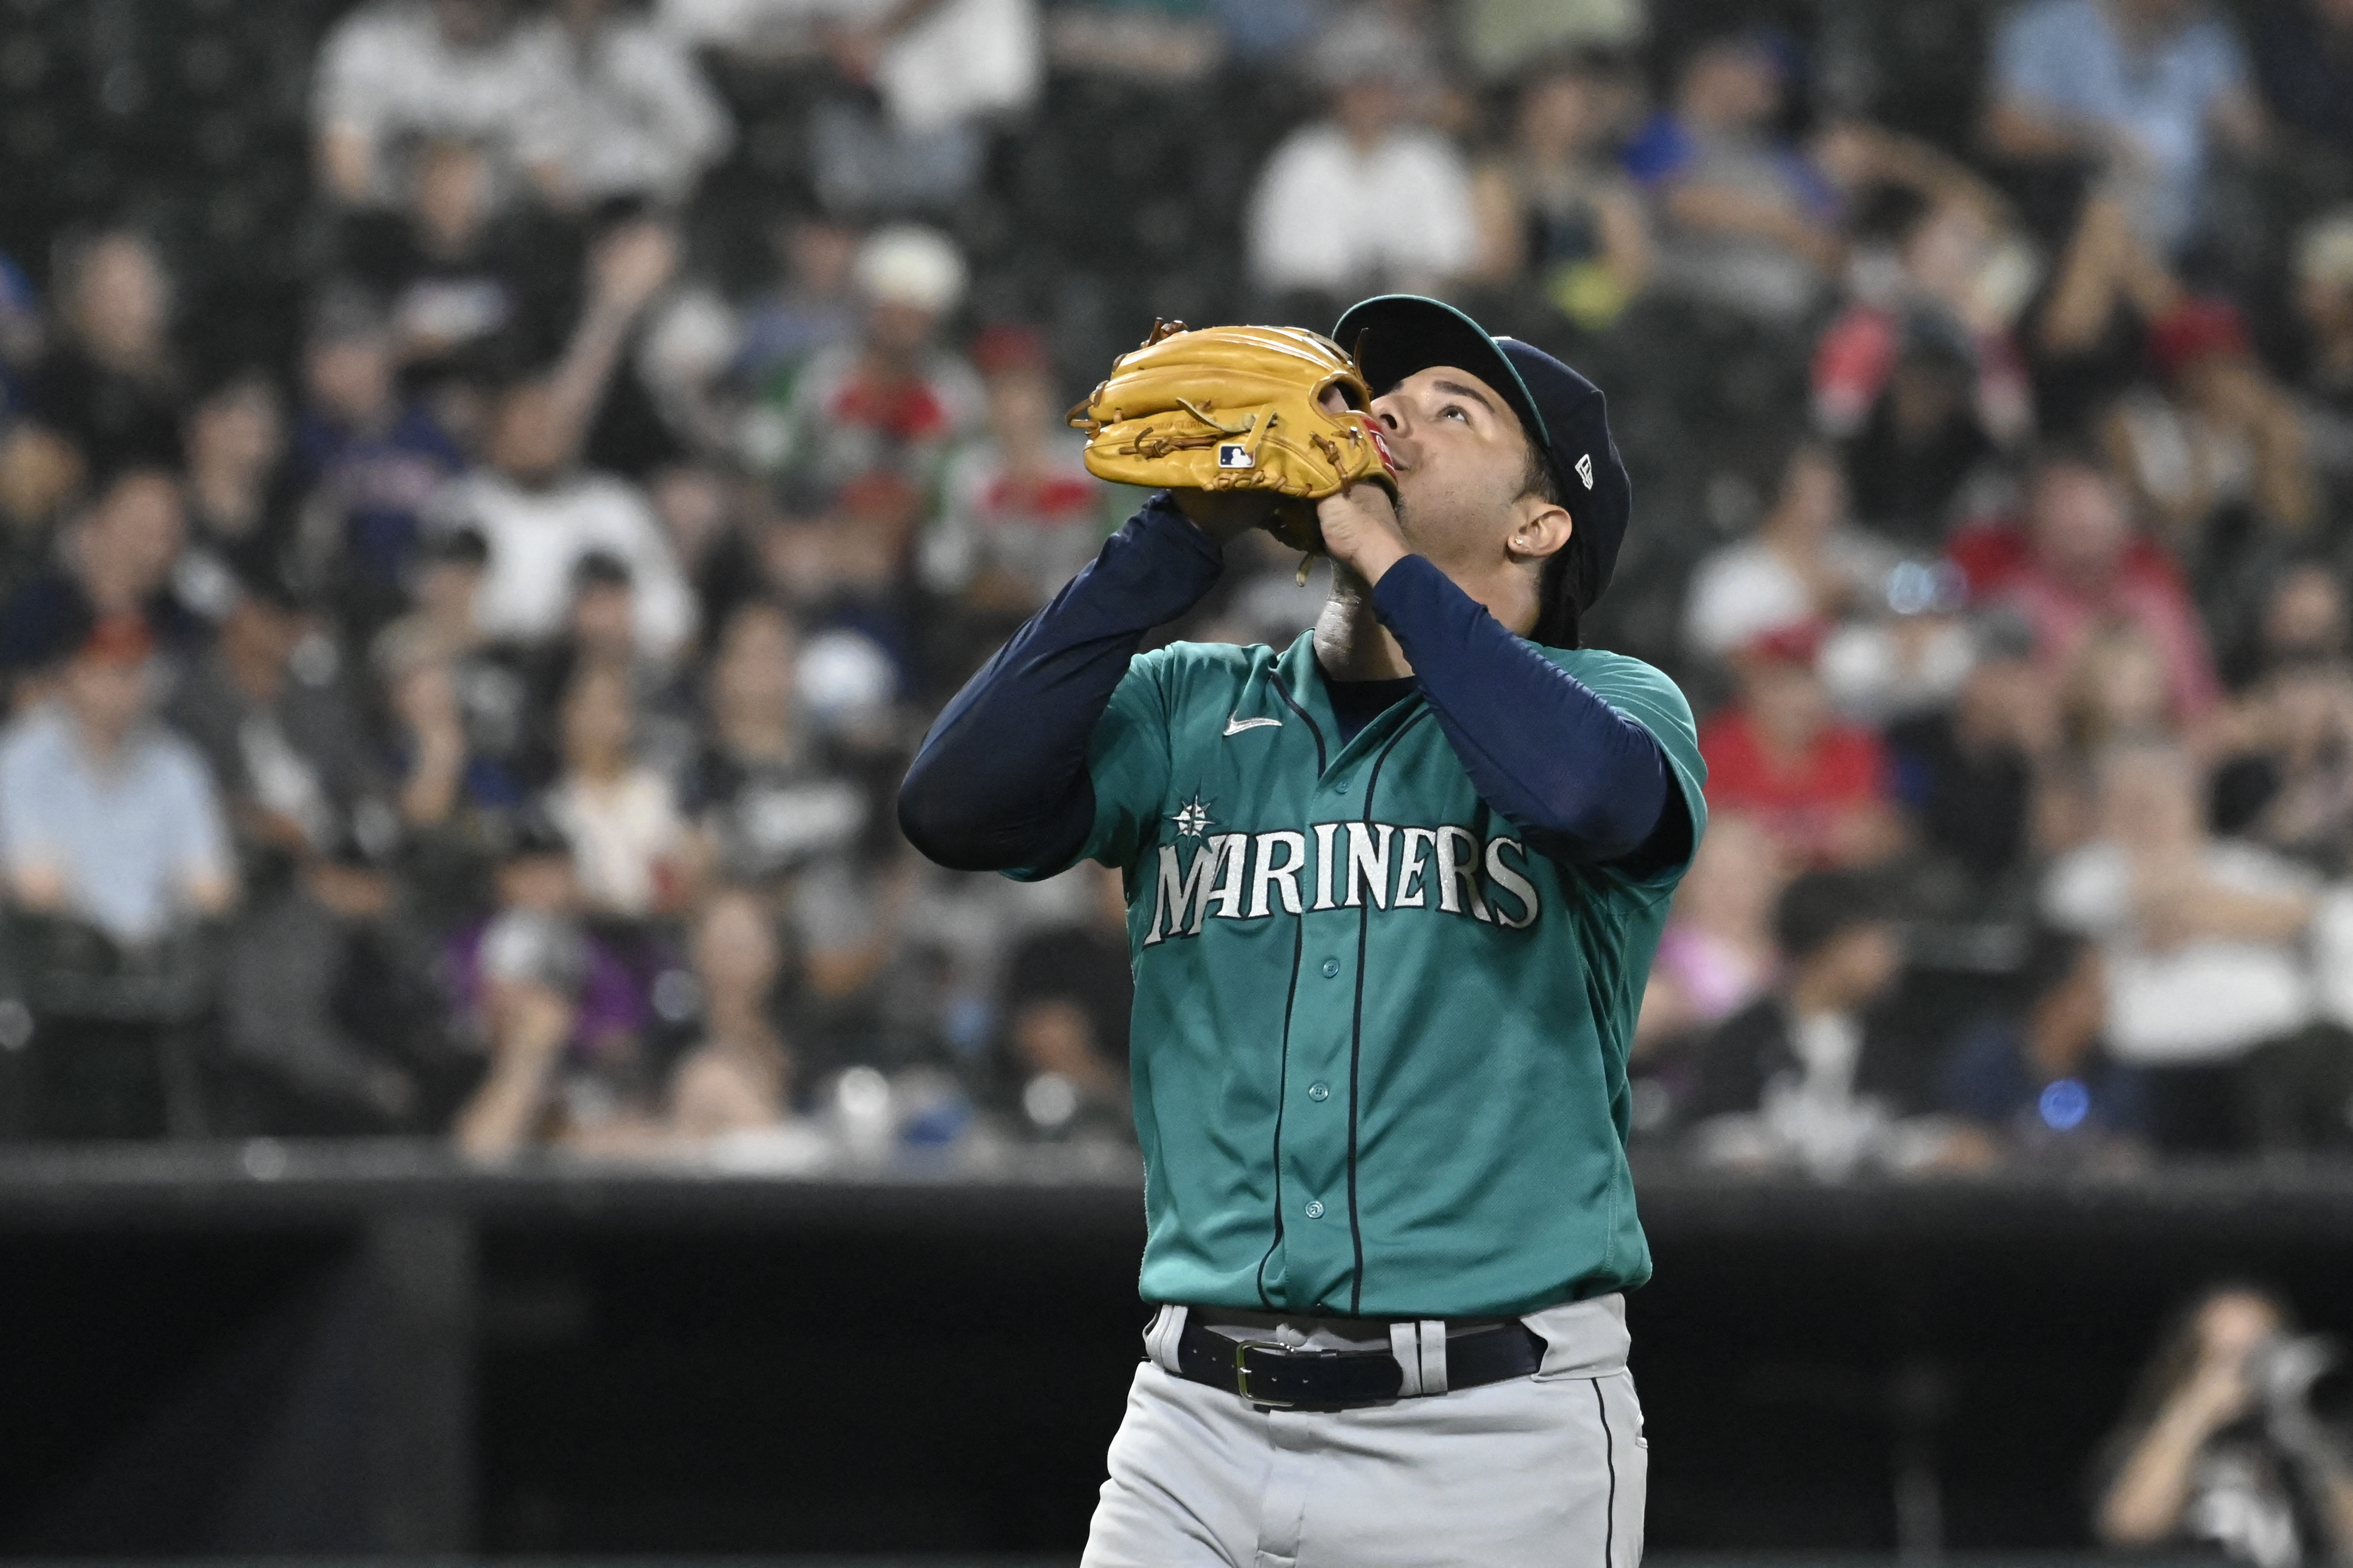 Cal Raleigh stars as Mariners pound White Sox 14-2 for 7th